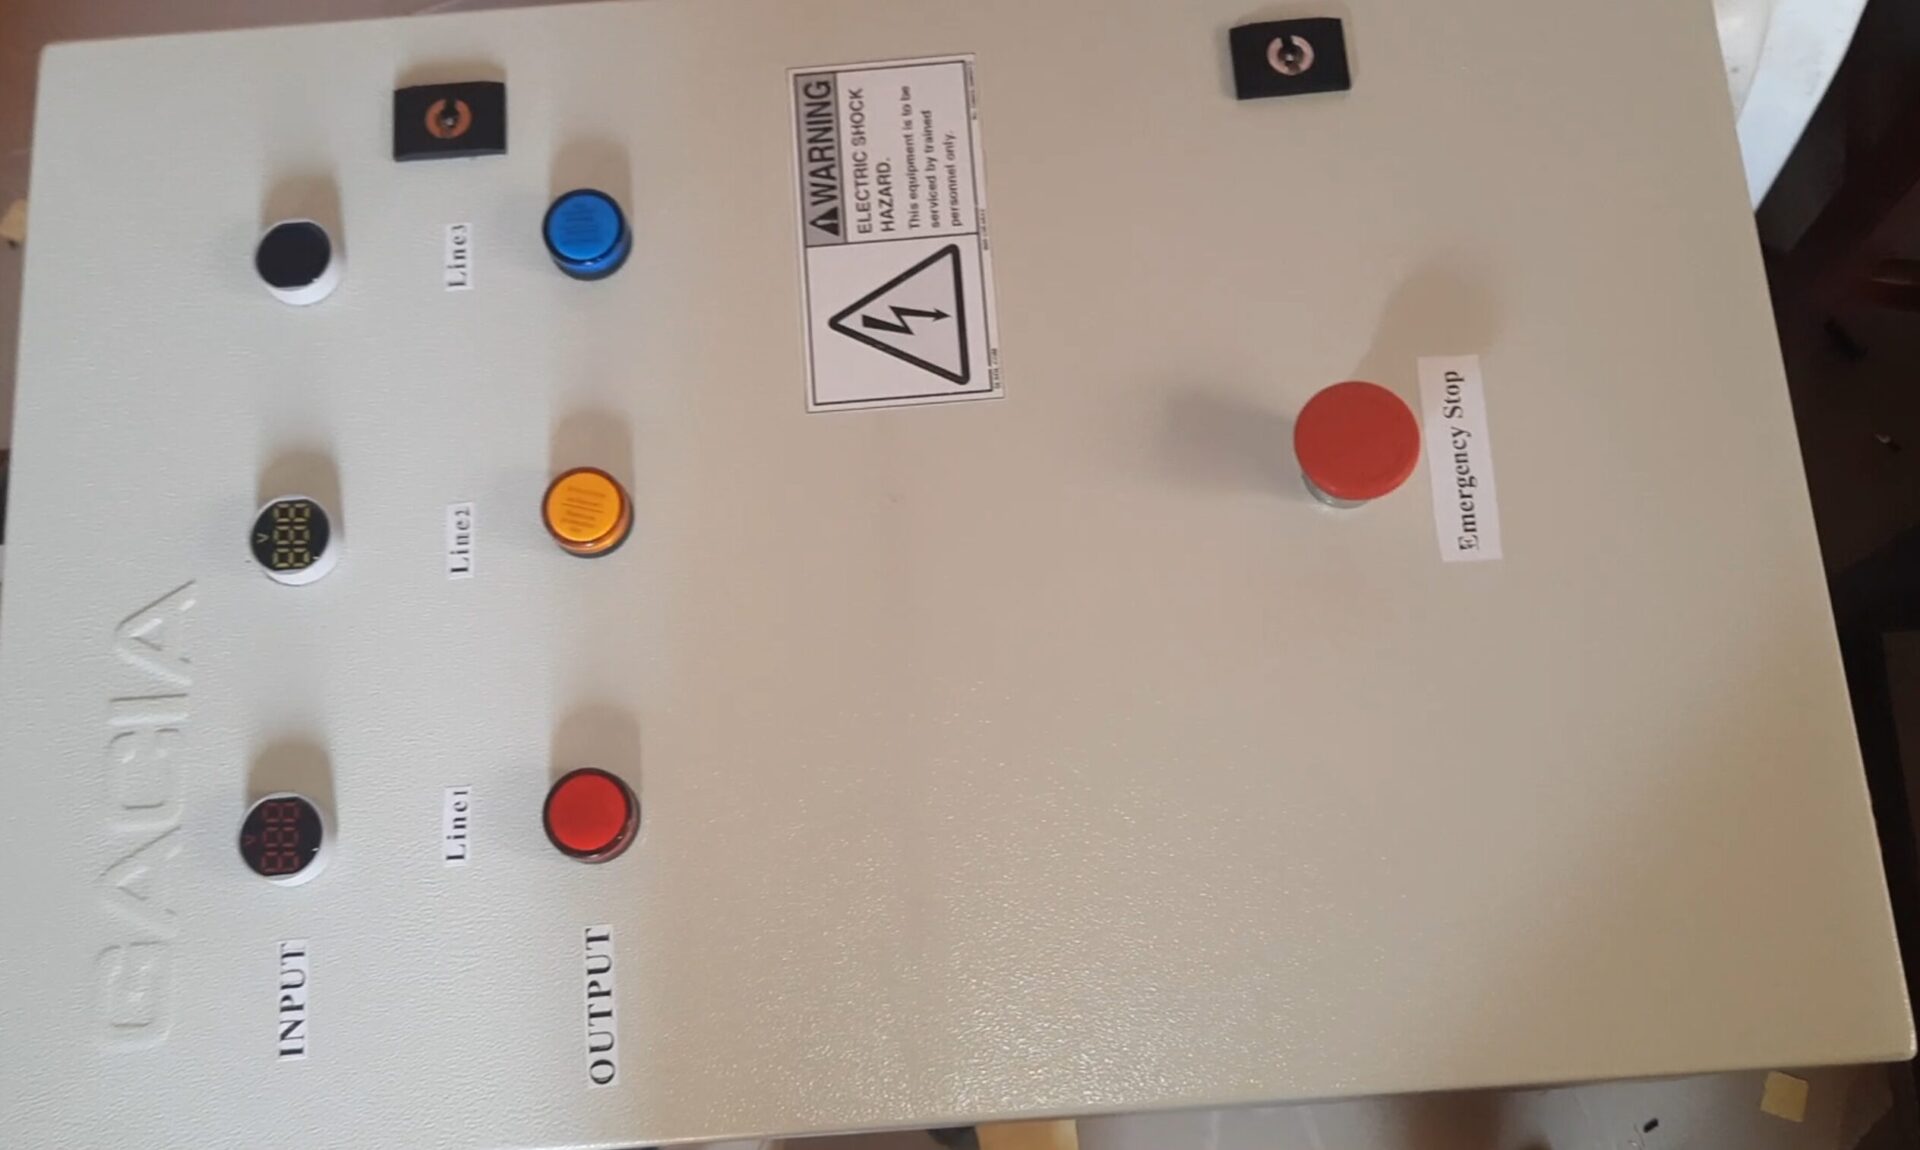 The completed design of the Automatic Phase Selector Panel